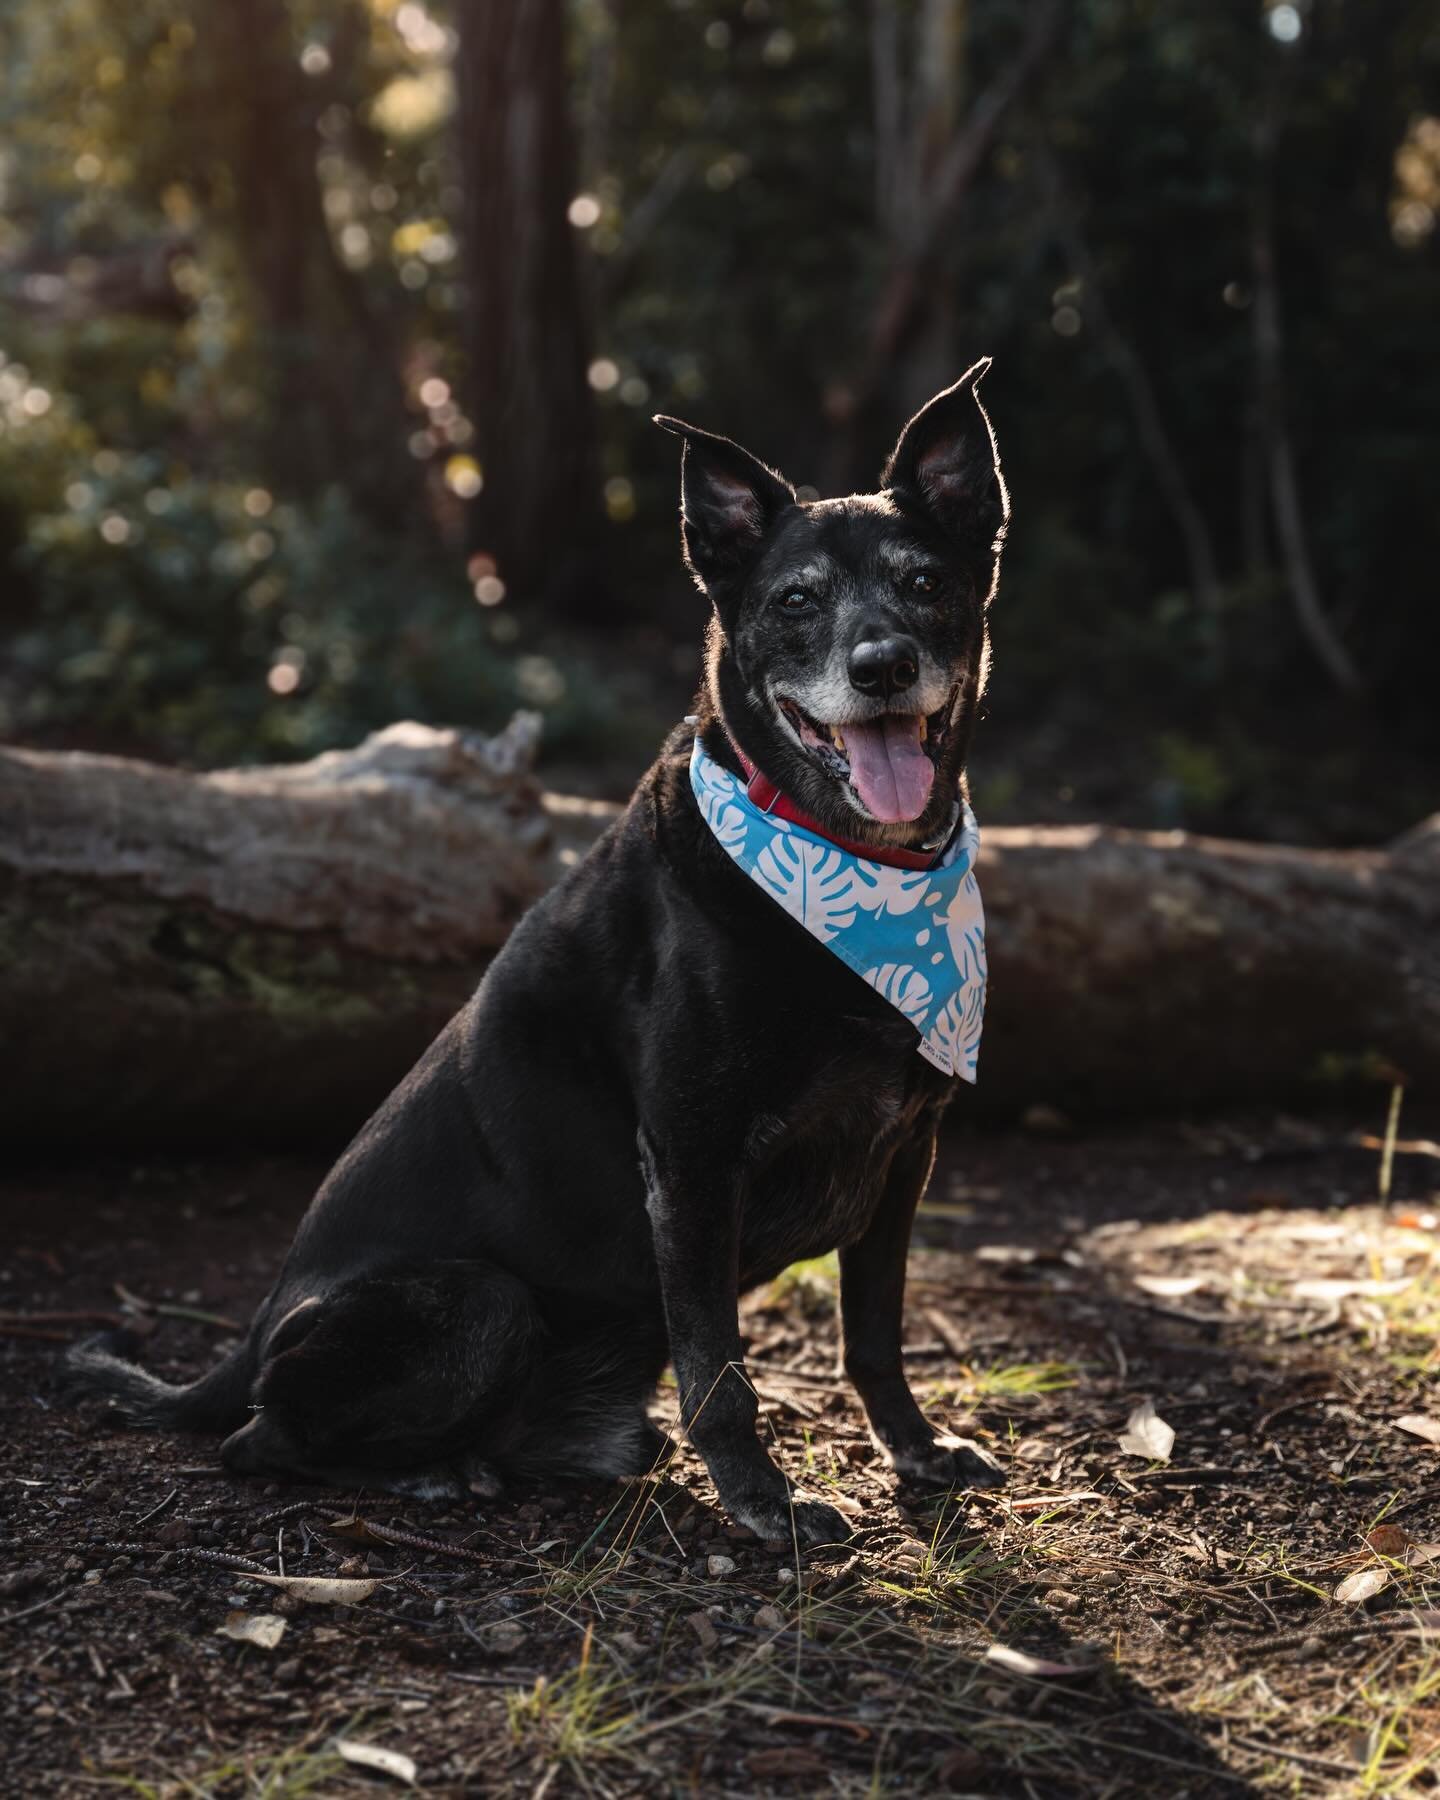 What better way to celebrate Earth day other than some outdoor photos! I had so much fun doing some outdoor photos for Dax. I normally do not do much outdoor sessions for dogs as I specialize in studio dog photography, but I do offer outdoor sessions